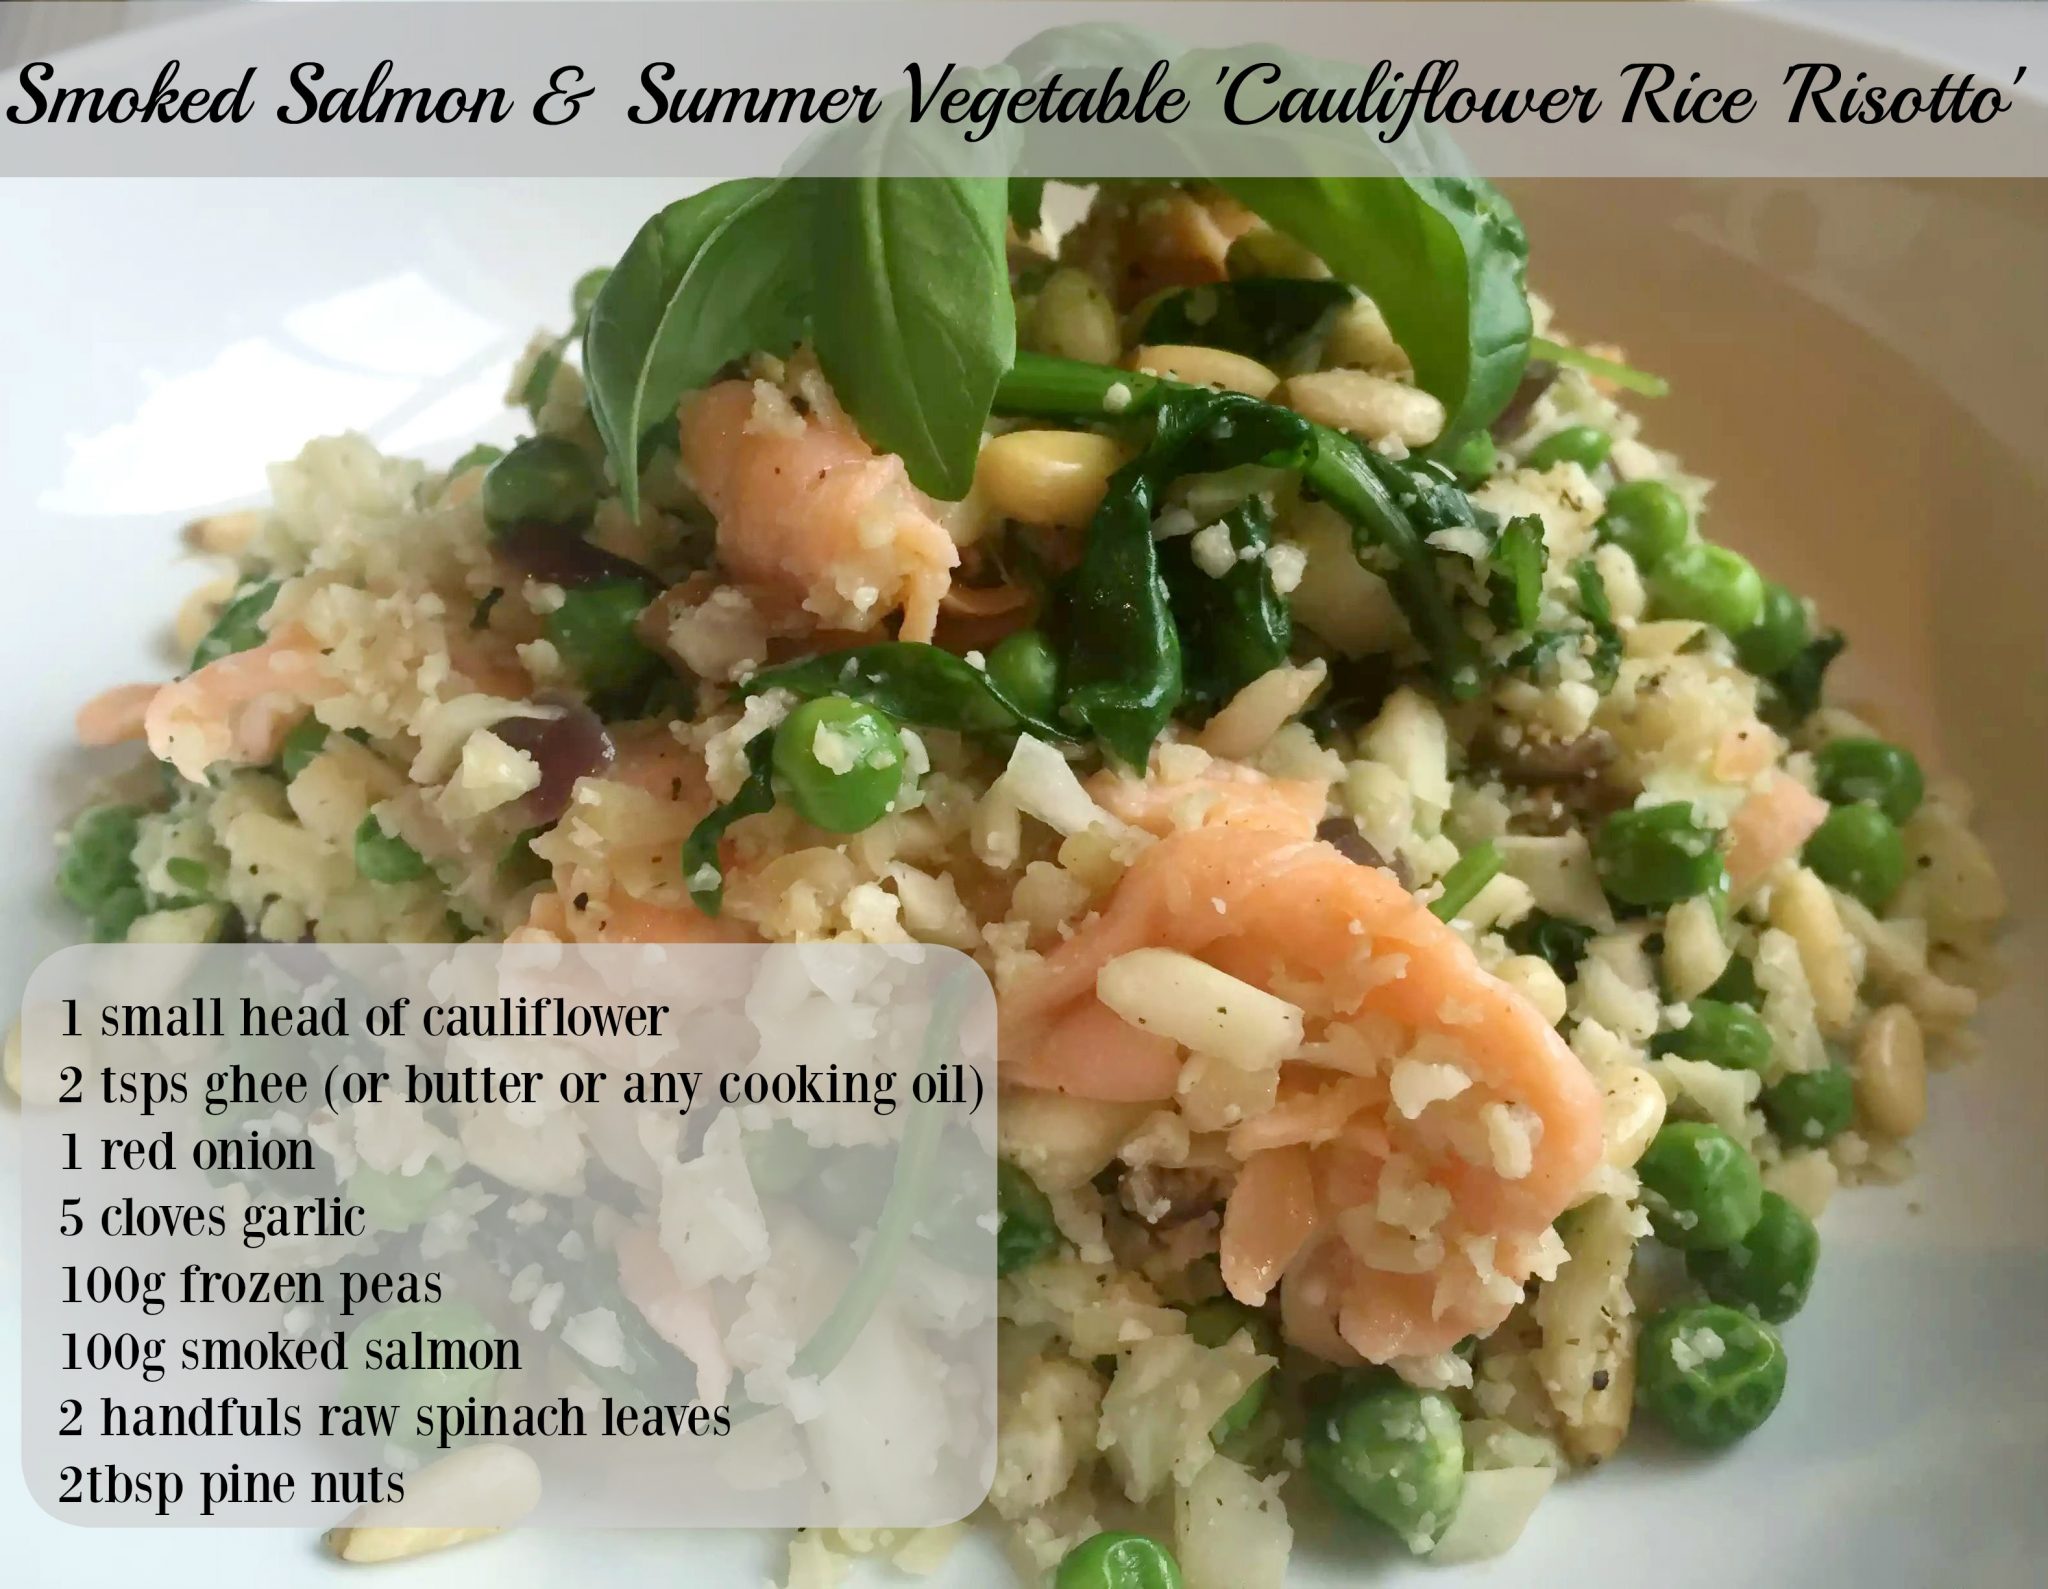 Smoked Salmon Pea Spinach Summer Vegetable Cauliflower Rice Risotto Garlic SCD Paleo Clean Eating Pine Nuts Foodie Healthy Recipe